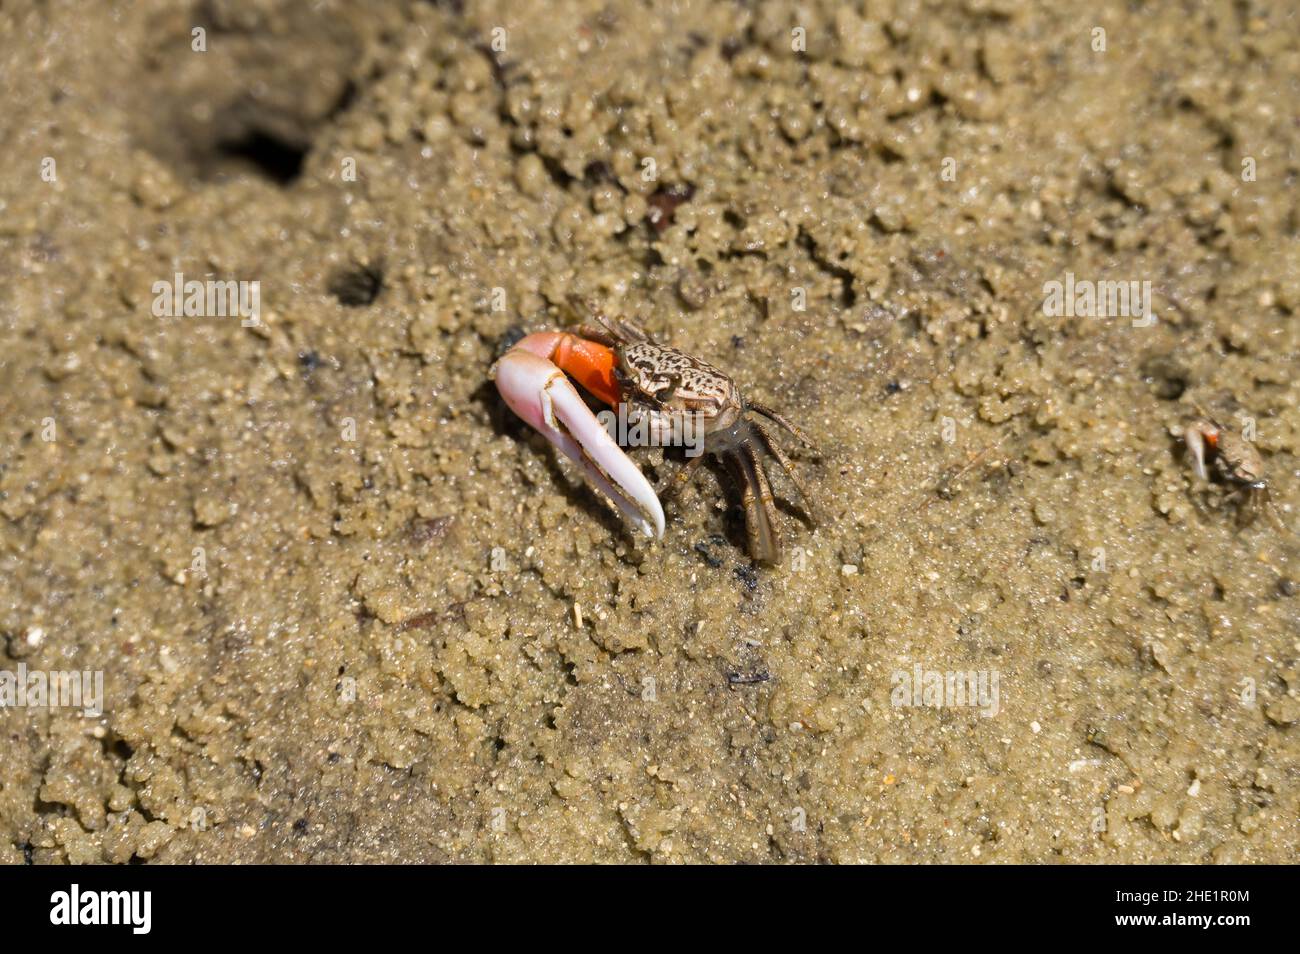 Fiddler crab (Austruca annulipes) with large white pincer arm, Kenya, East Africa Stock Photo